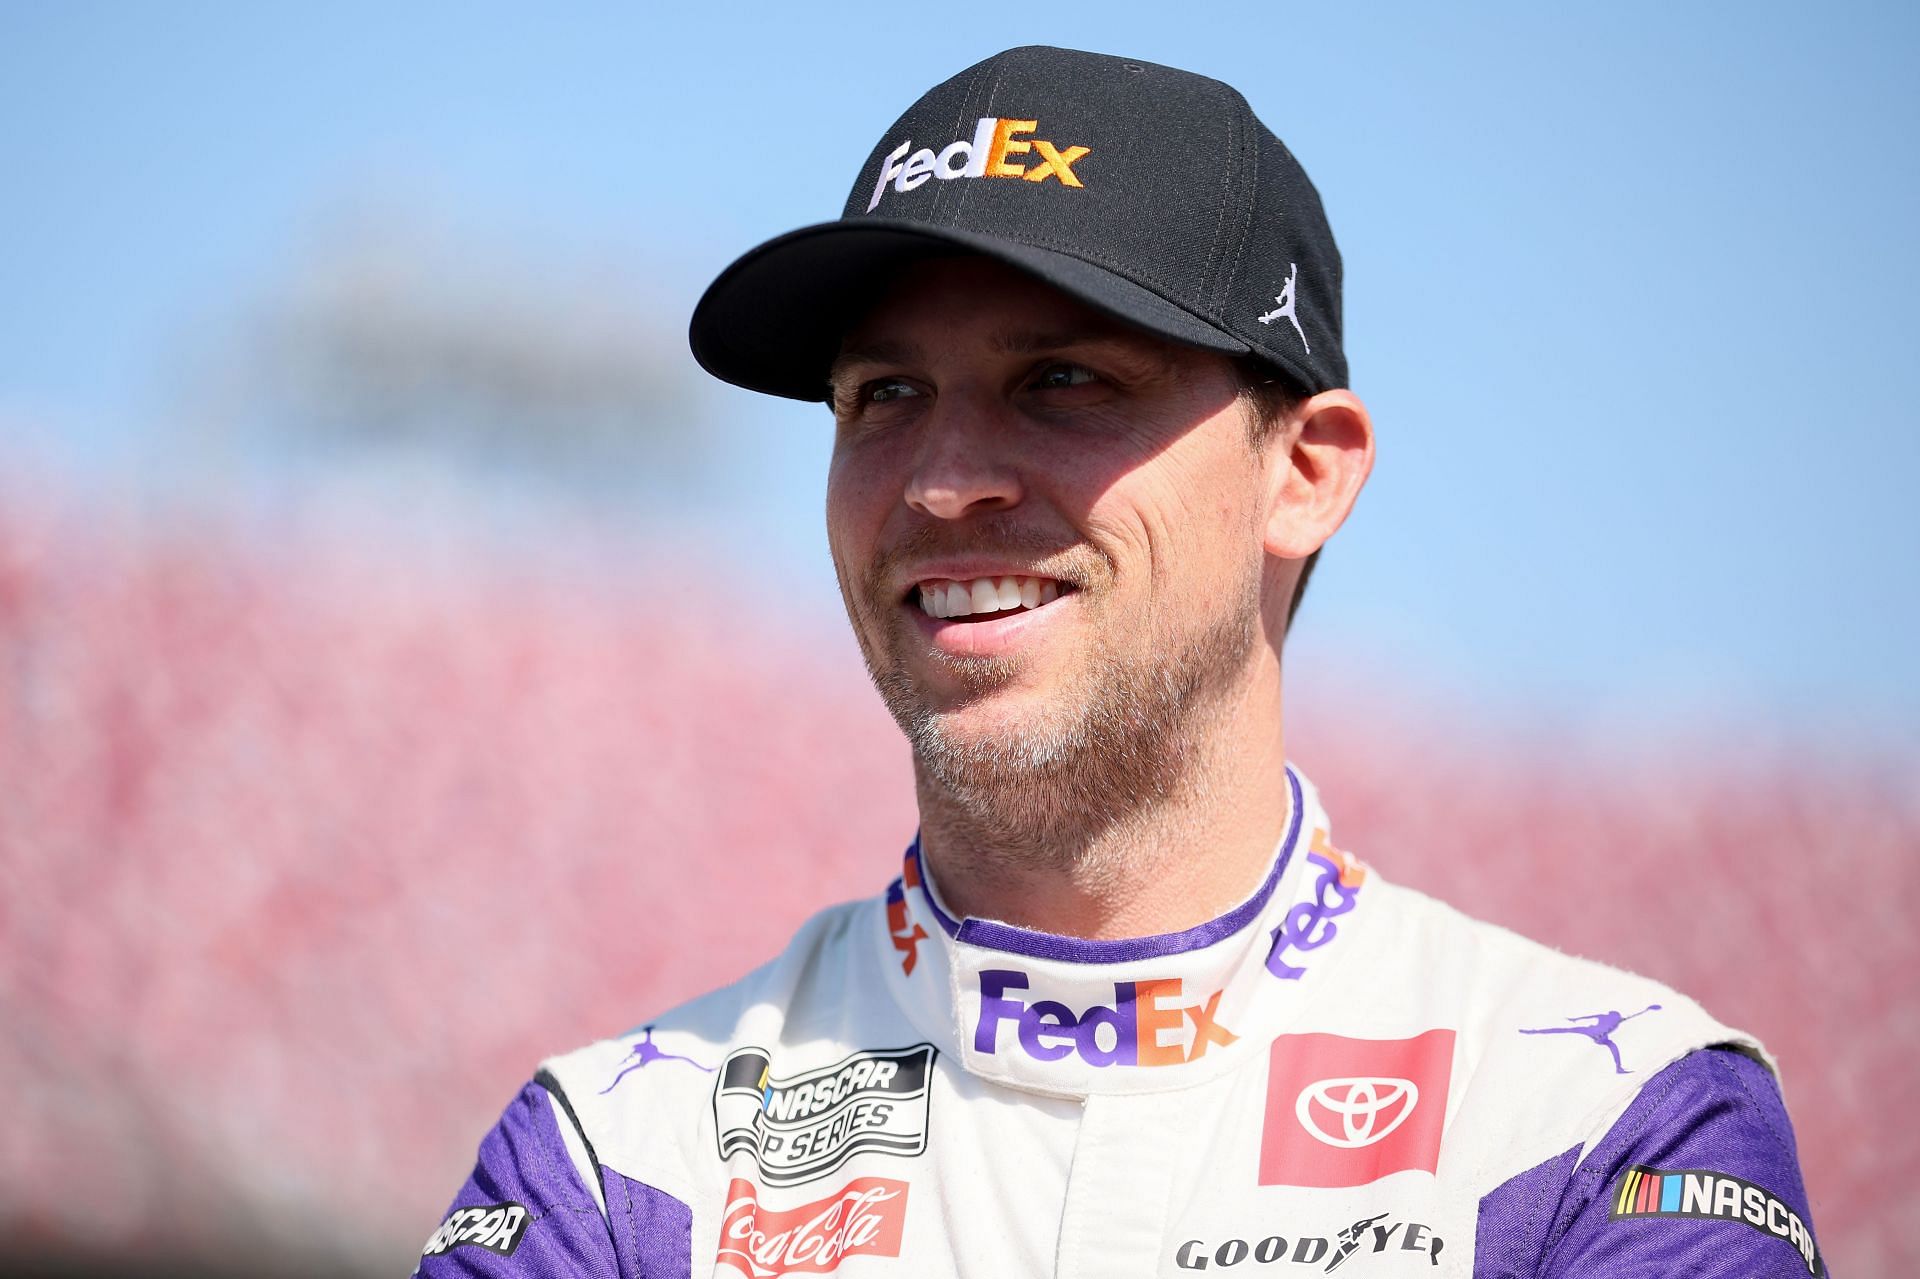 Denny Hamlin waits on the grid during qualifying for the NASCAR Cup Series GEICO 500 at Talladega Superspeedway (Photo by James Gilbert/Getty Images)